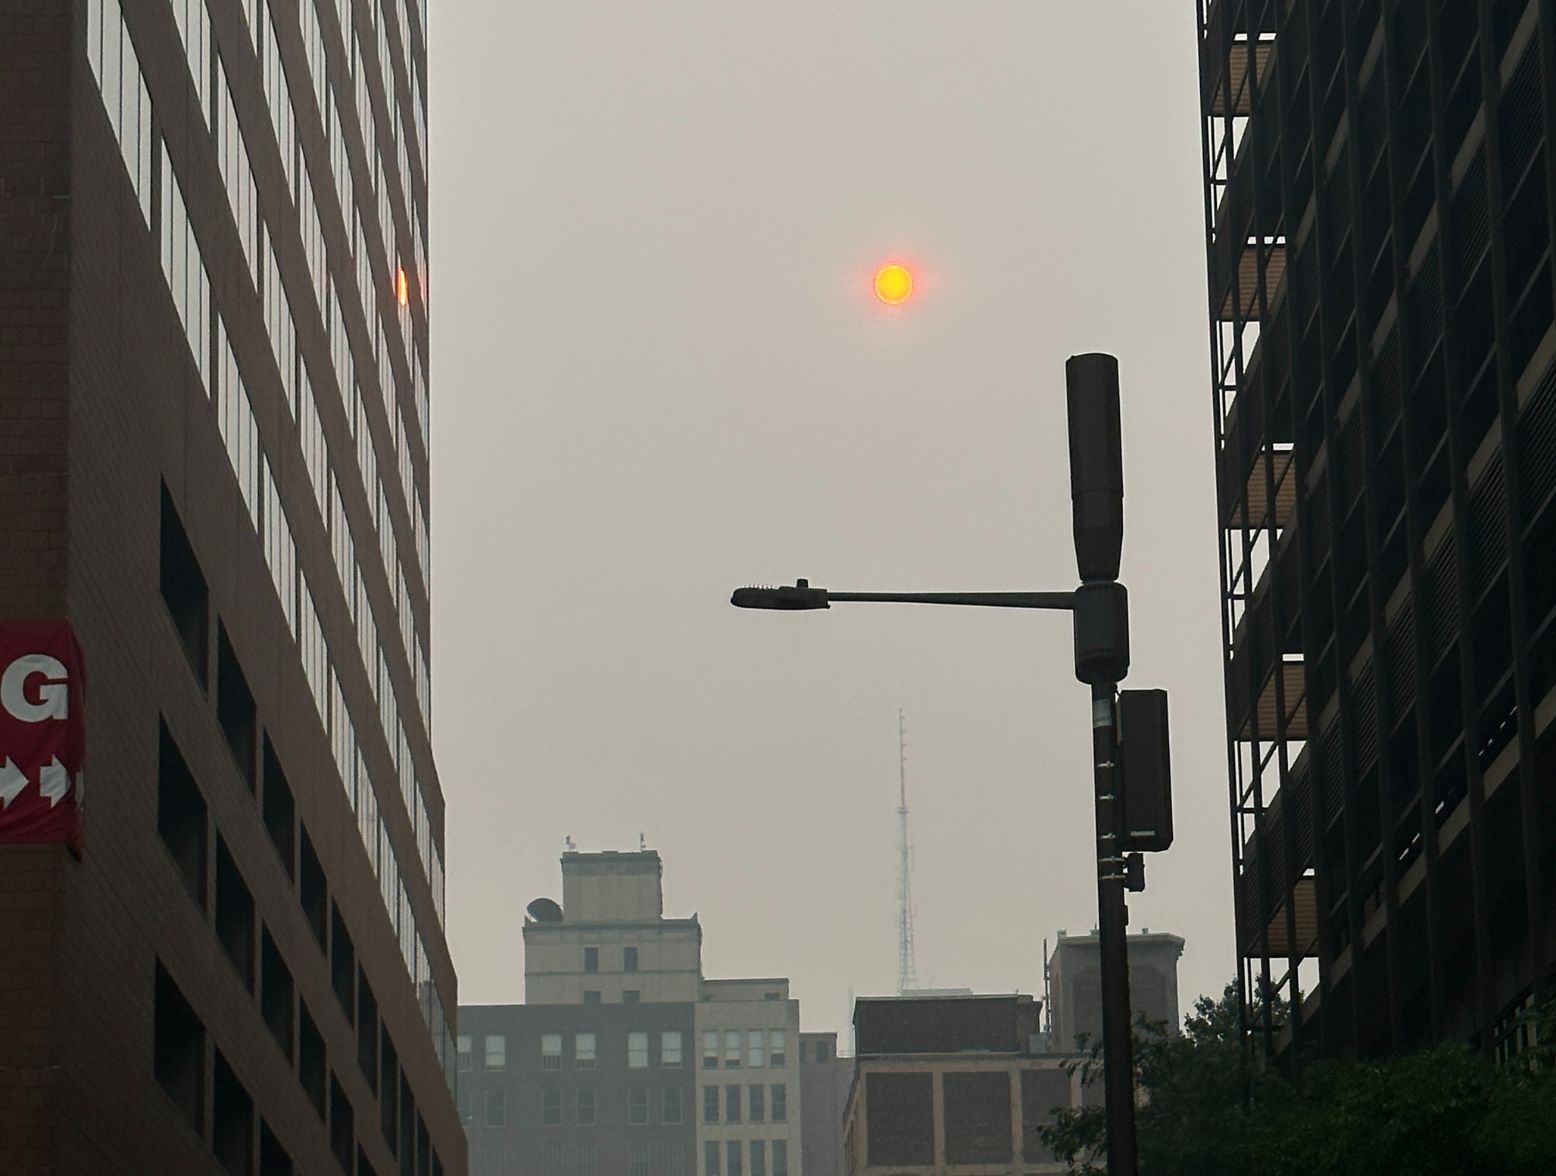 Canadian Wildfire Smoke is still here, and the sun is orange through the plumes of smoke